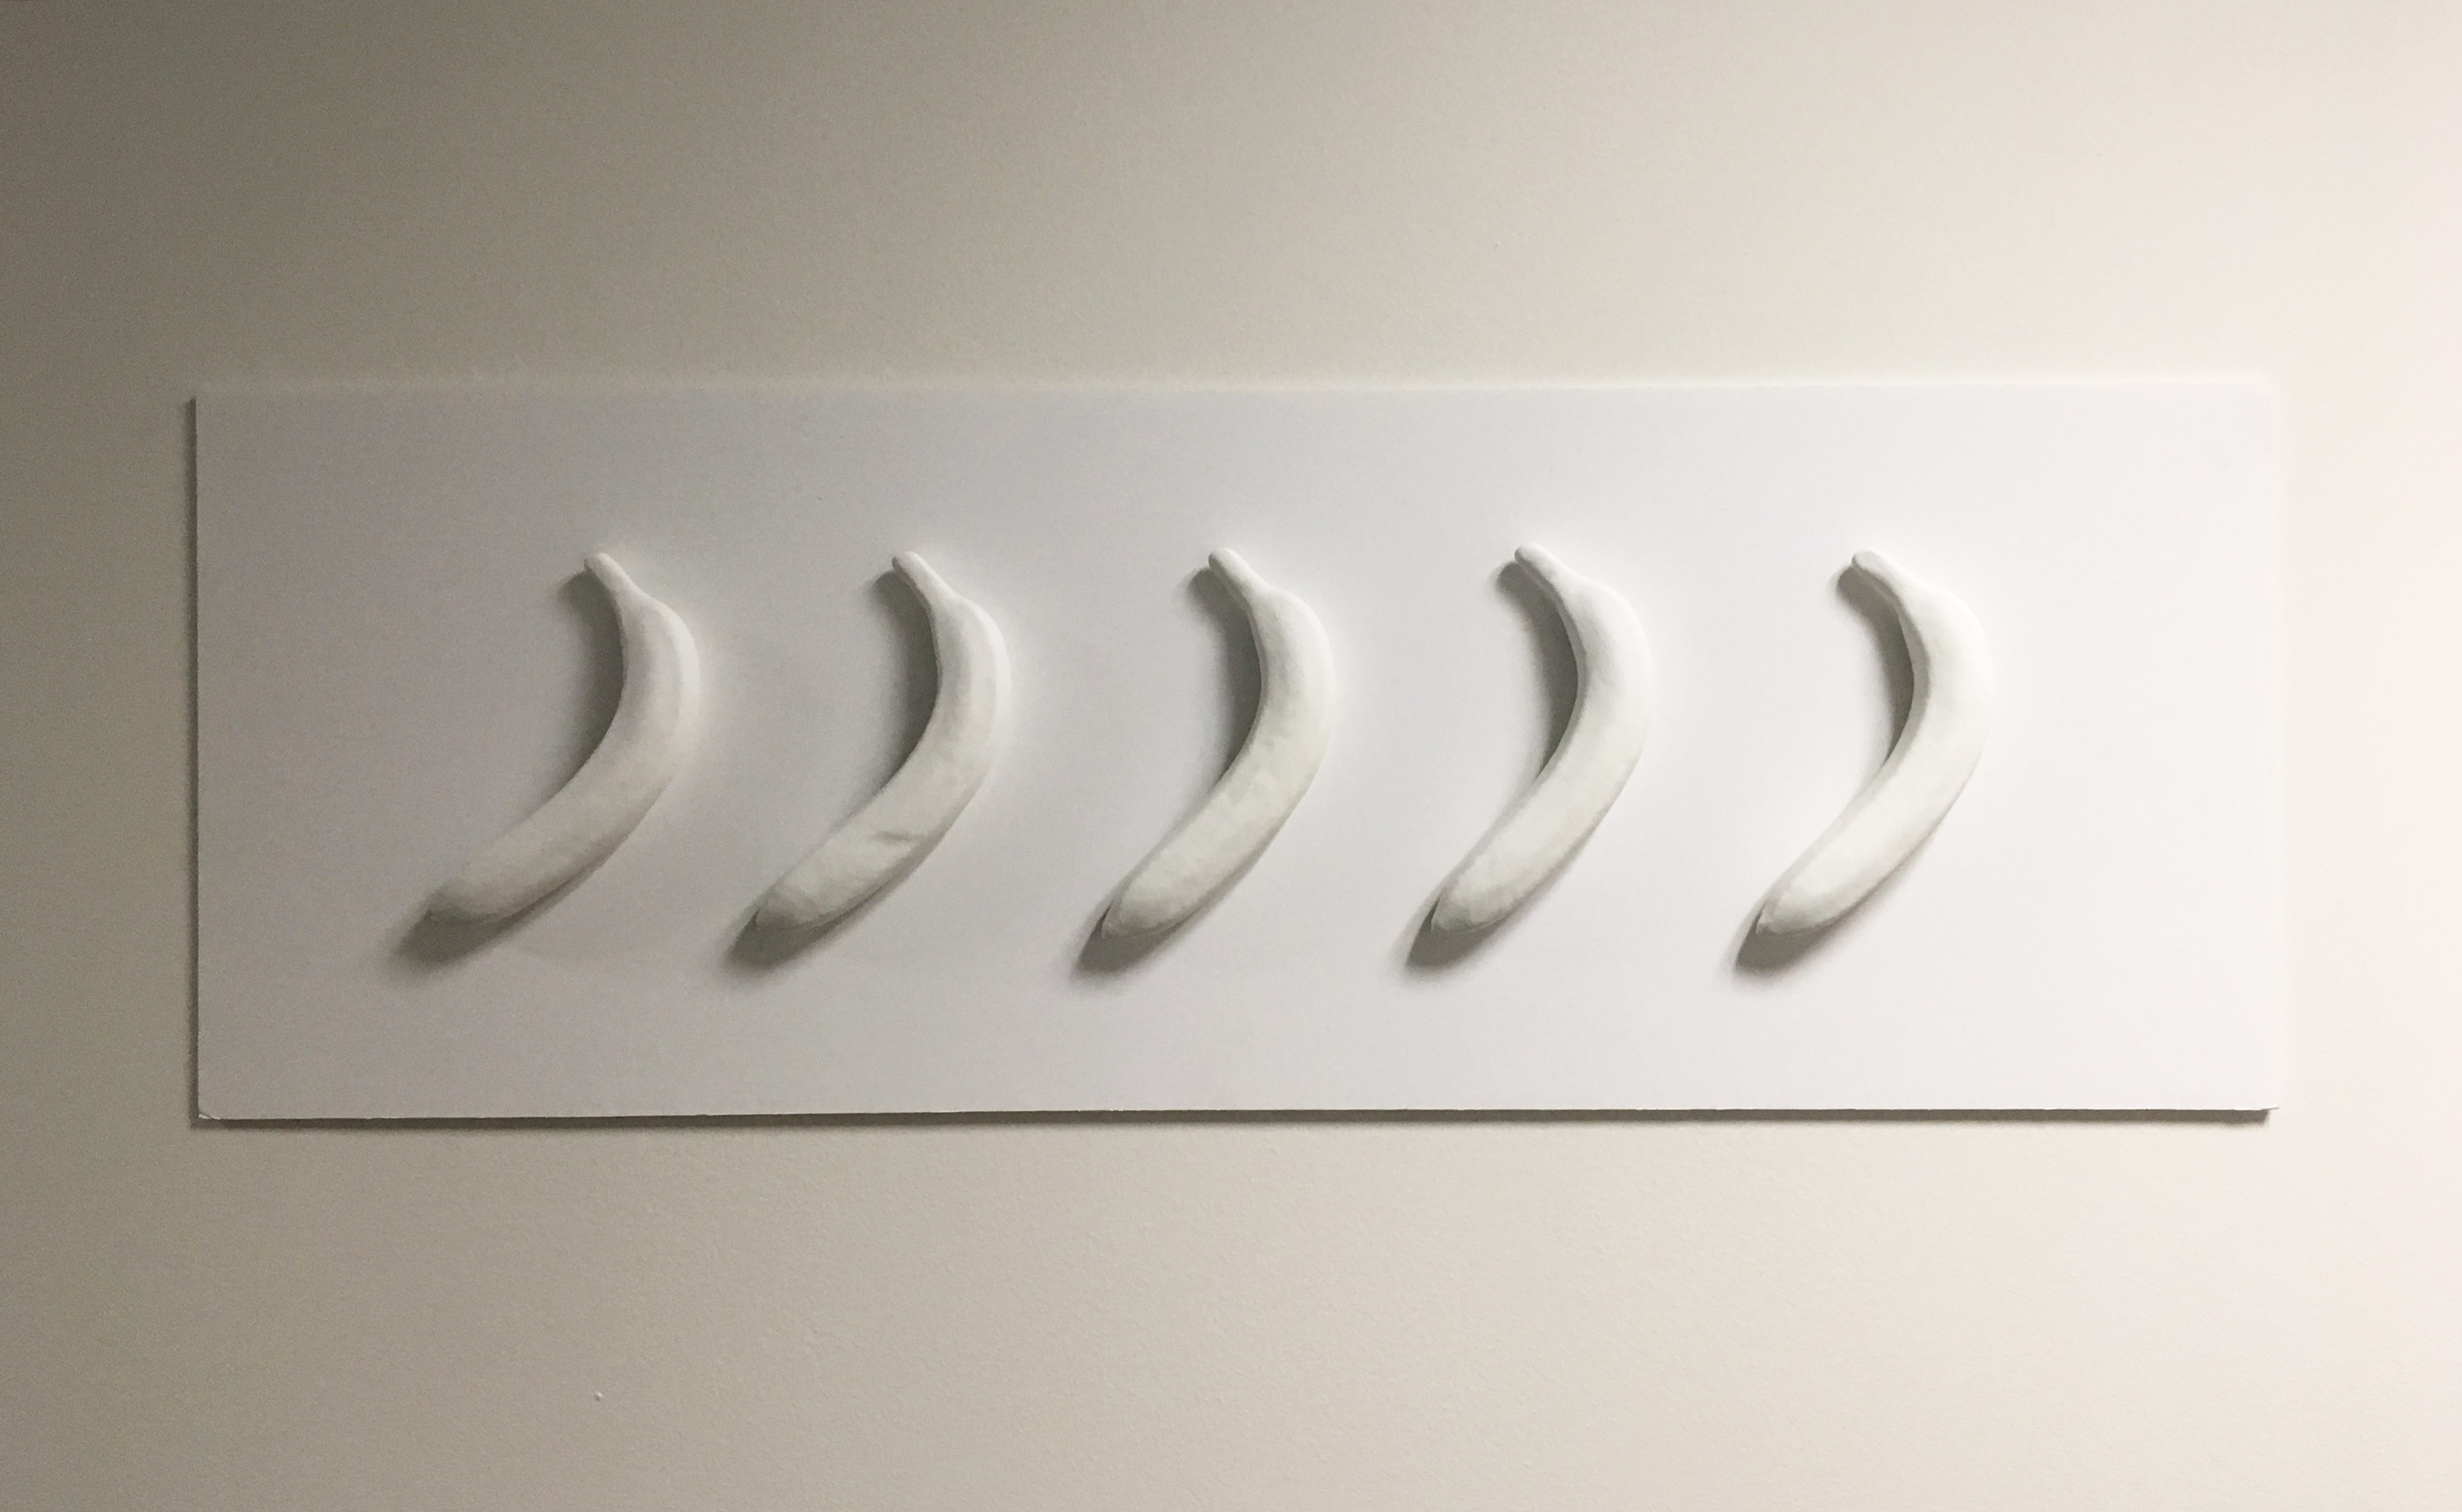 Five plastic bananas painted in white and pasted to a white wall.